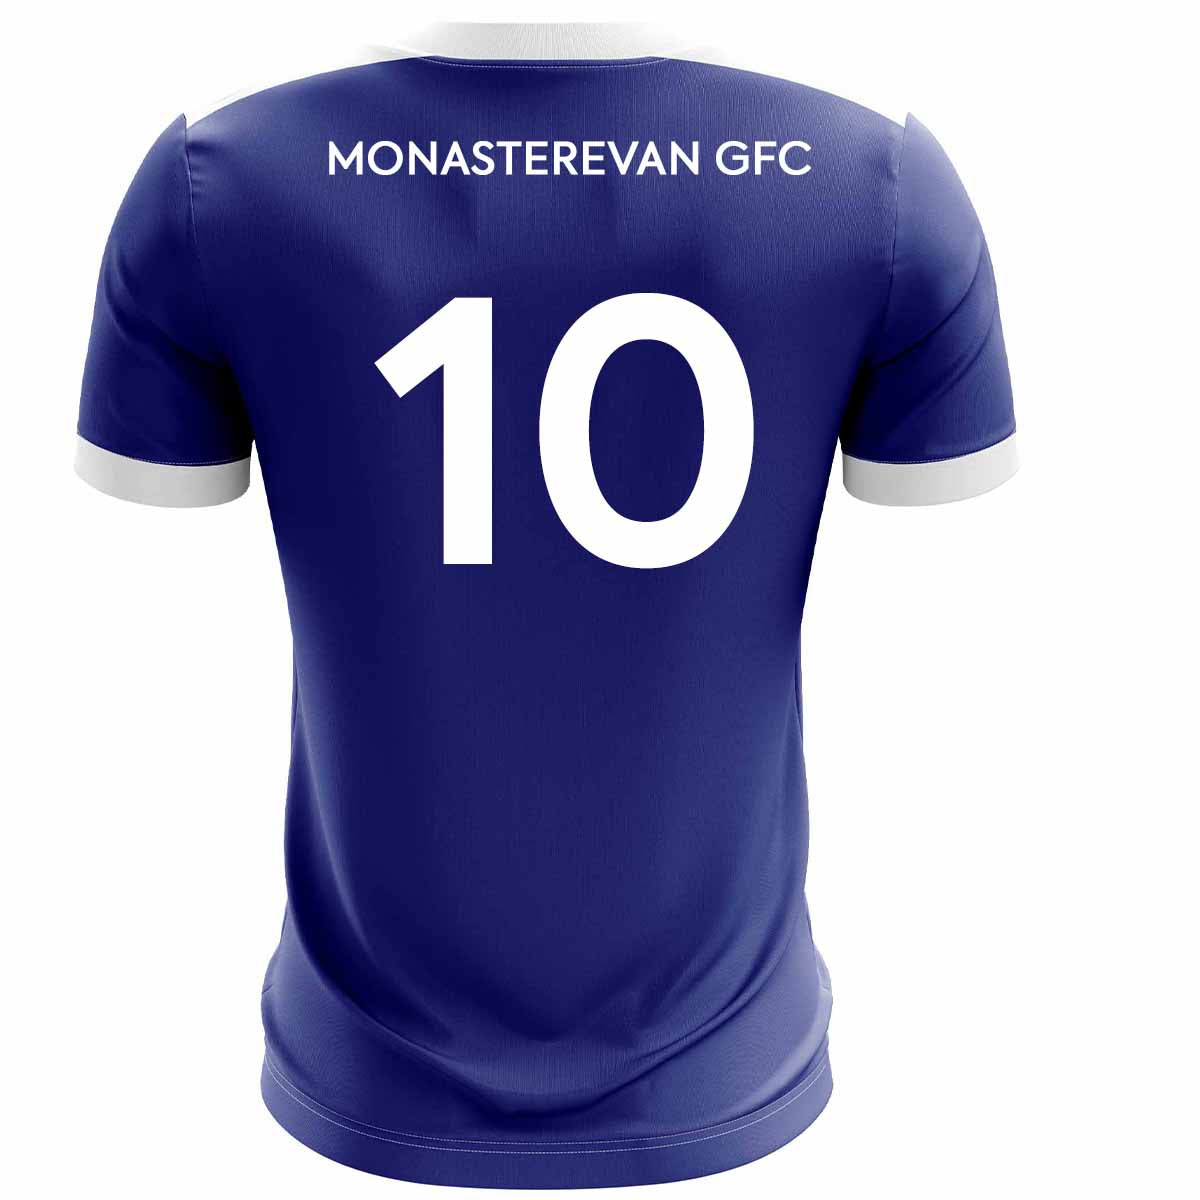 Mc Keever Monasterevan GFC Numbered Playing Jersey 3 - Youth - Royal